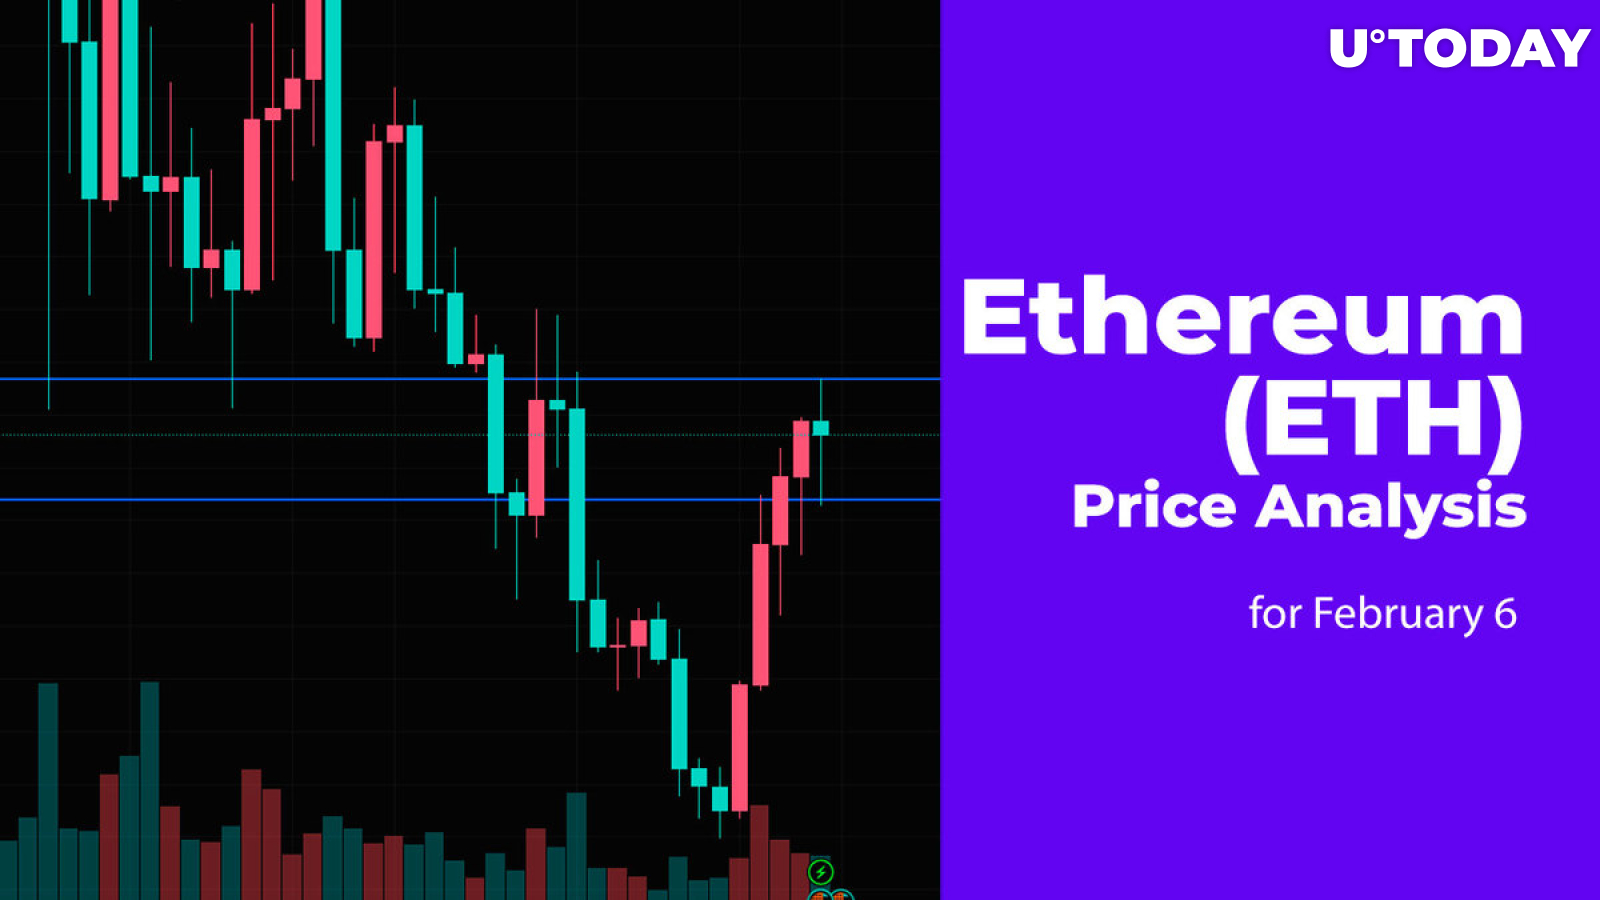 Ethereum (ETH) Price Analysis for February 6